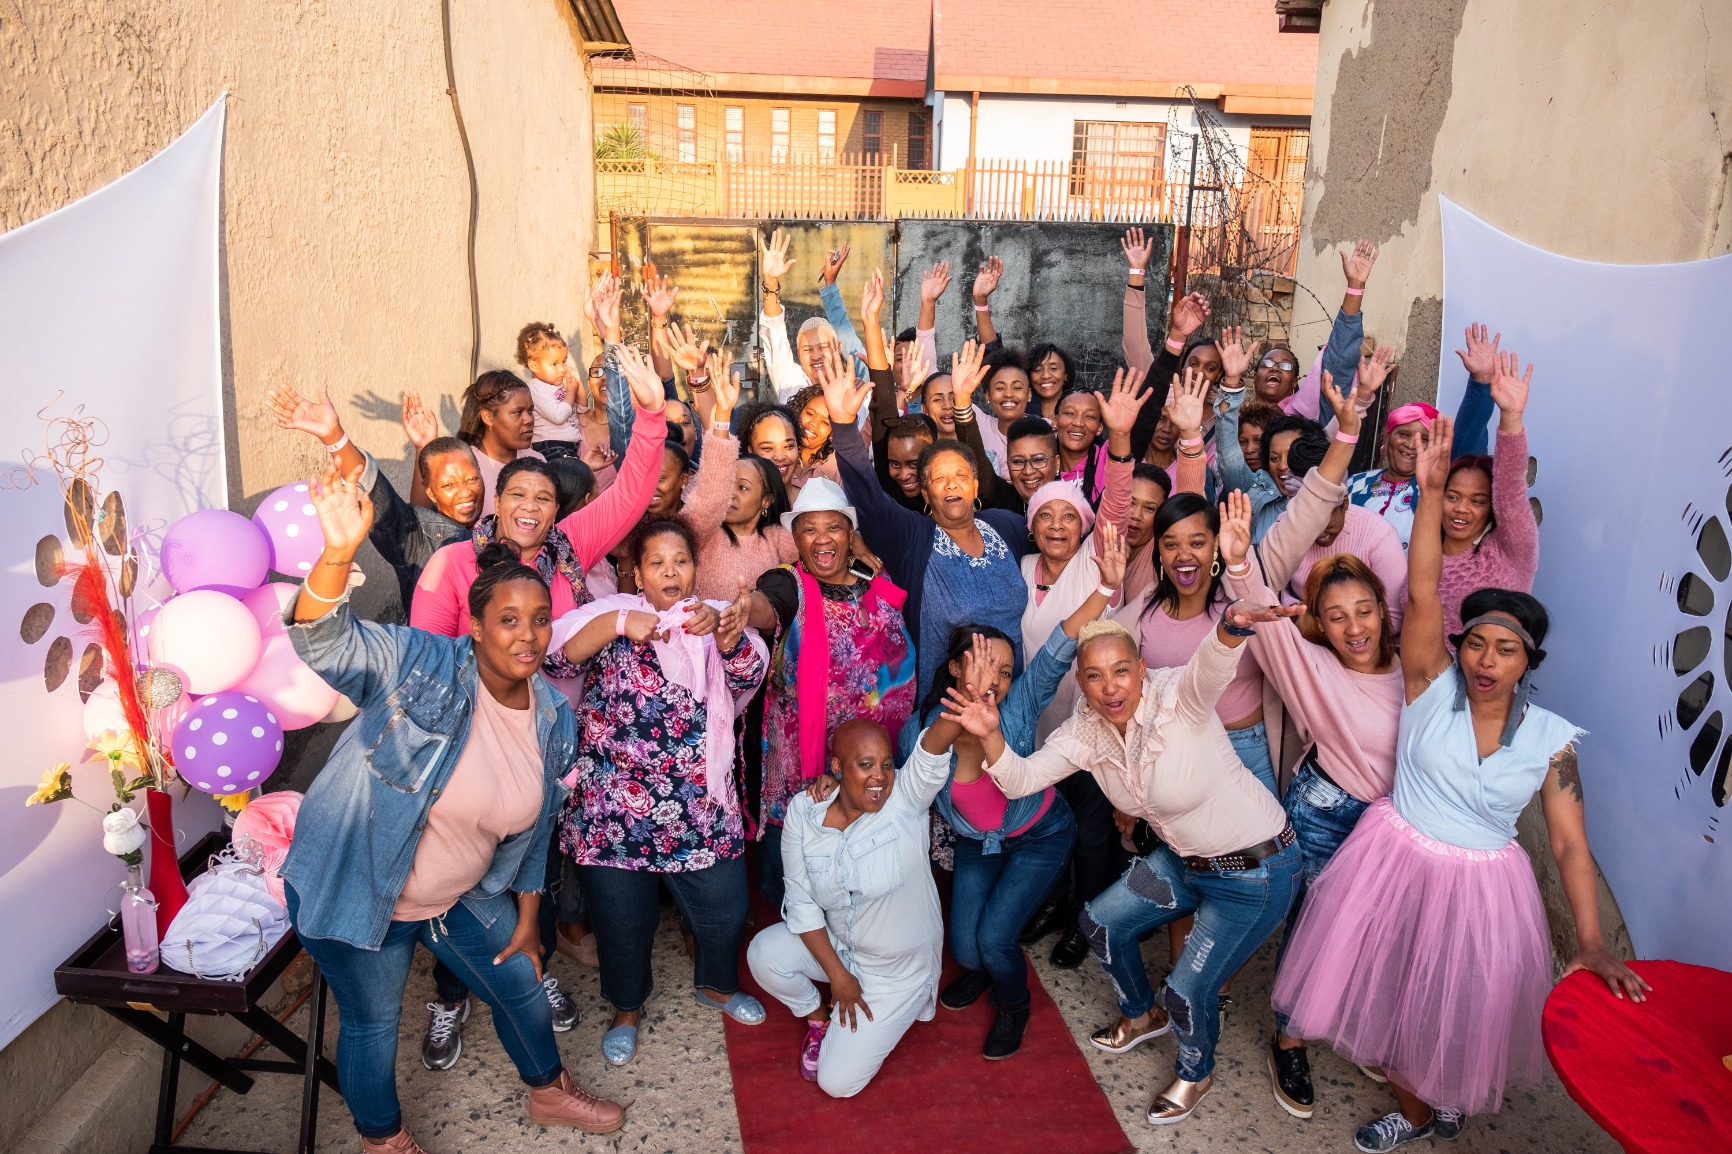 Women of Westbury posing with their hands raised high, smiling and all wearing pink